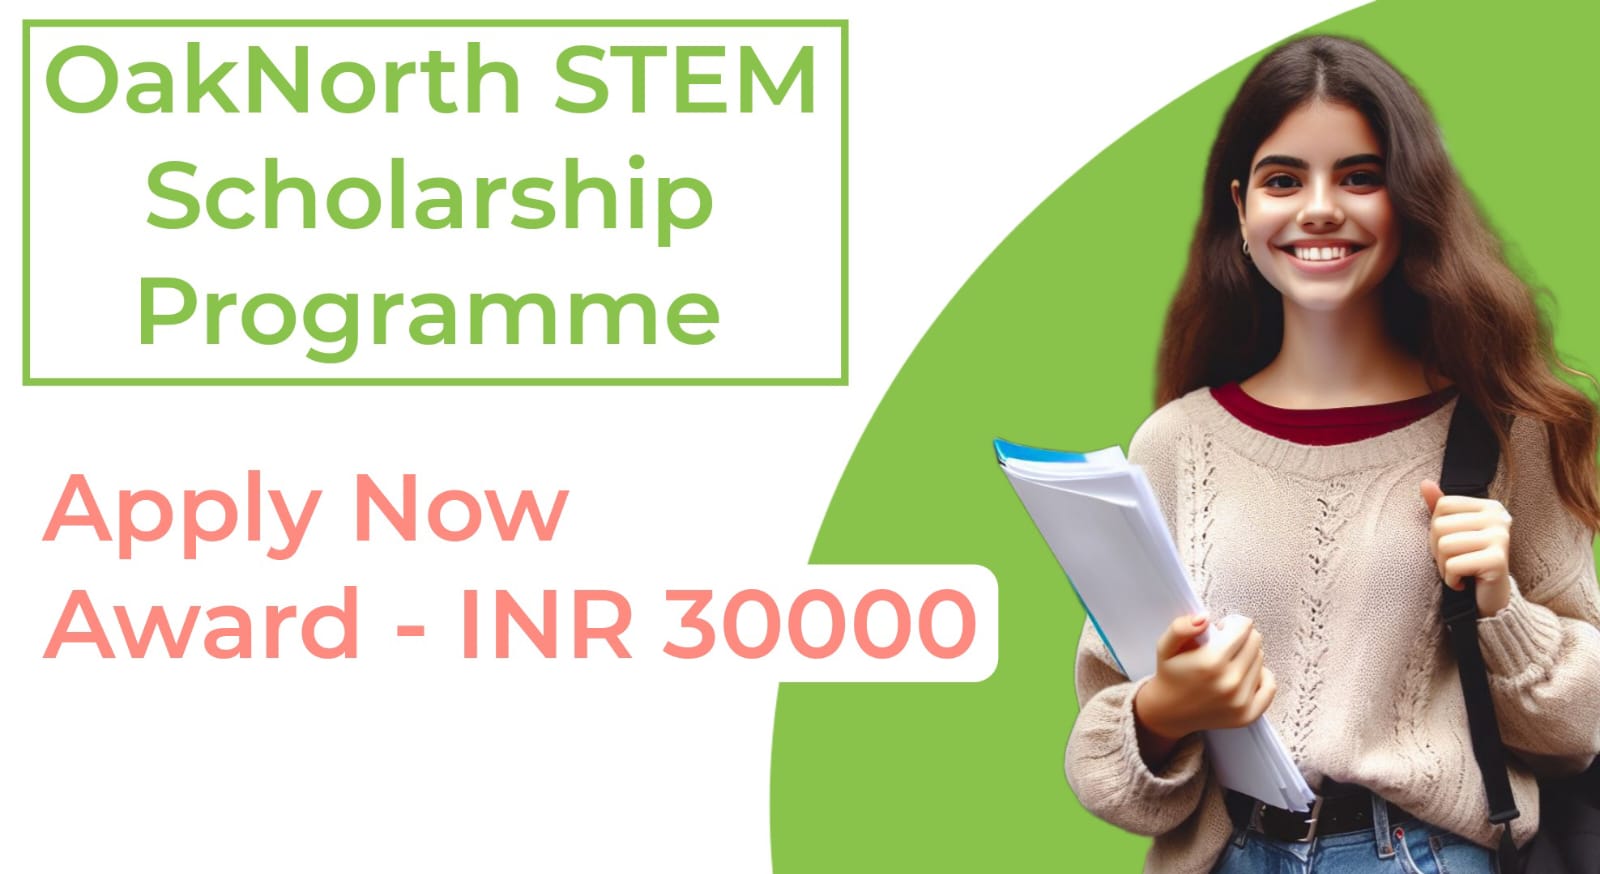 How To Apply For OakNorth Scholarship Programme?